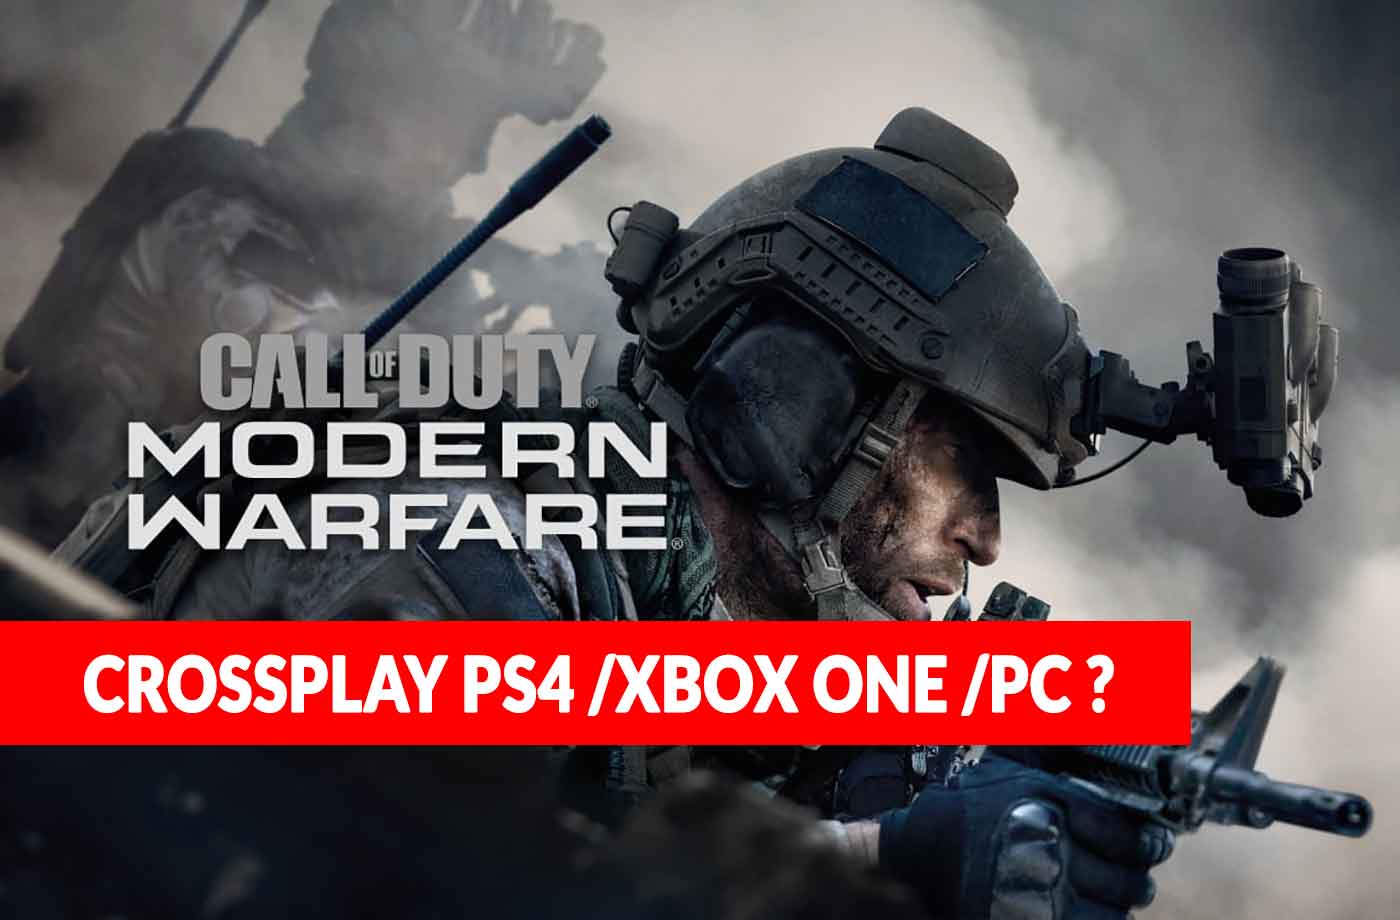 Call of Duty Modern Warfare is it possible to play